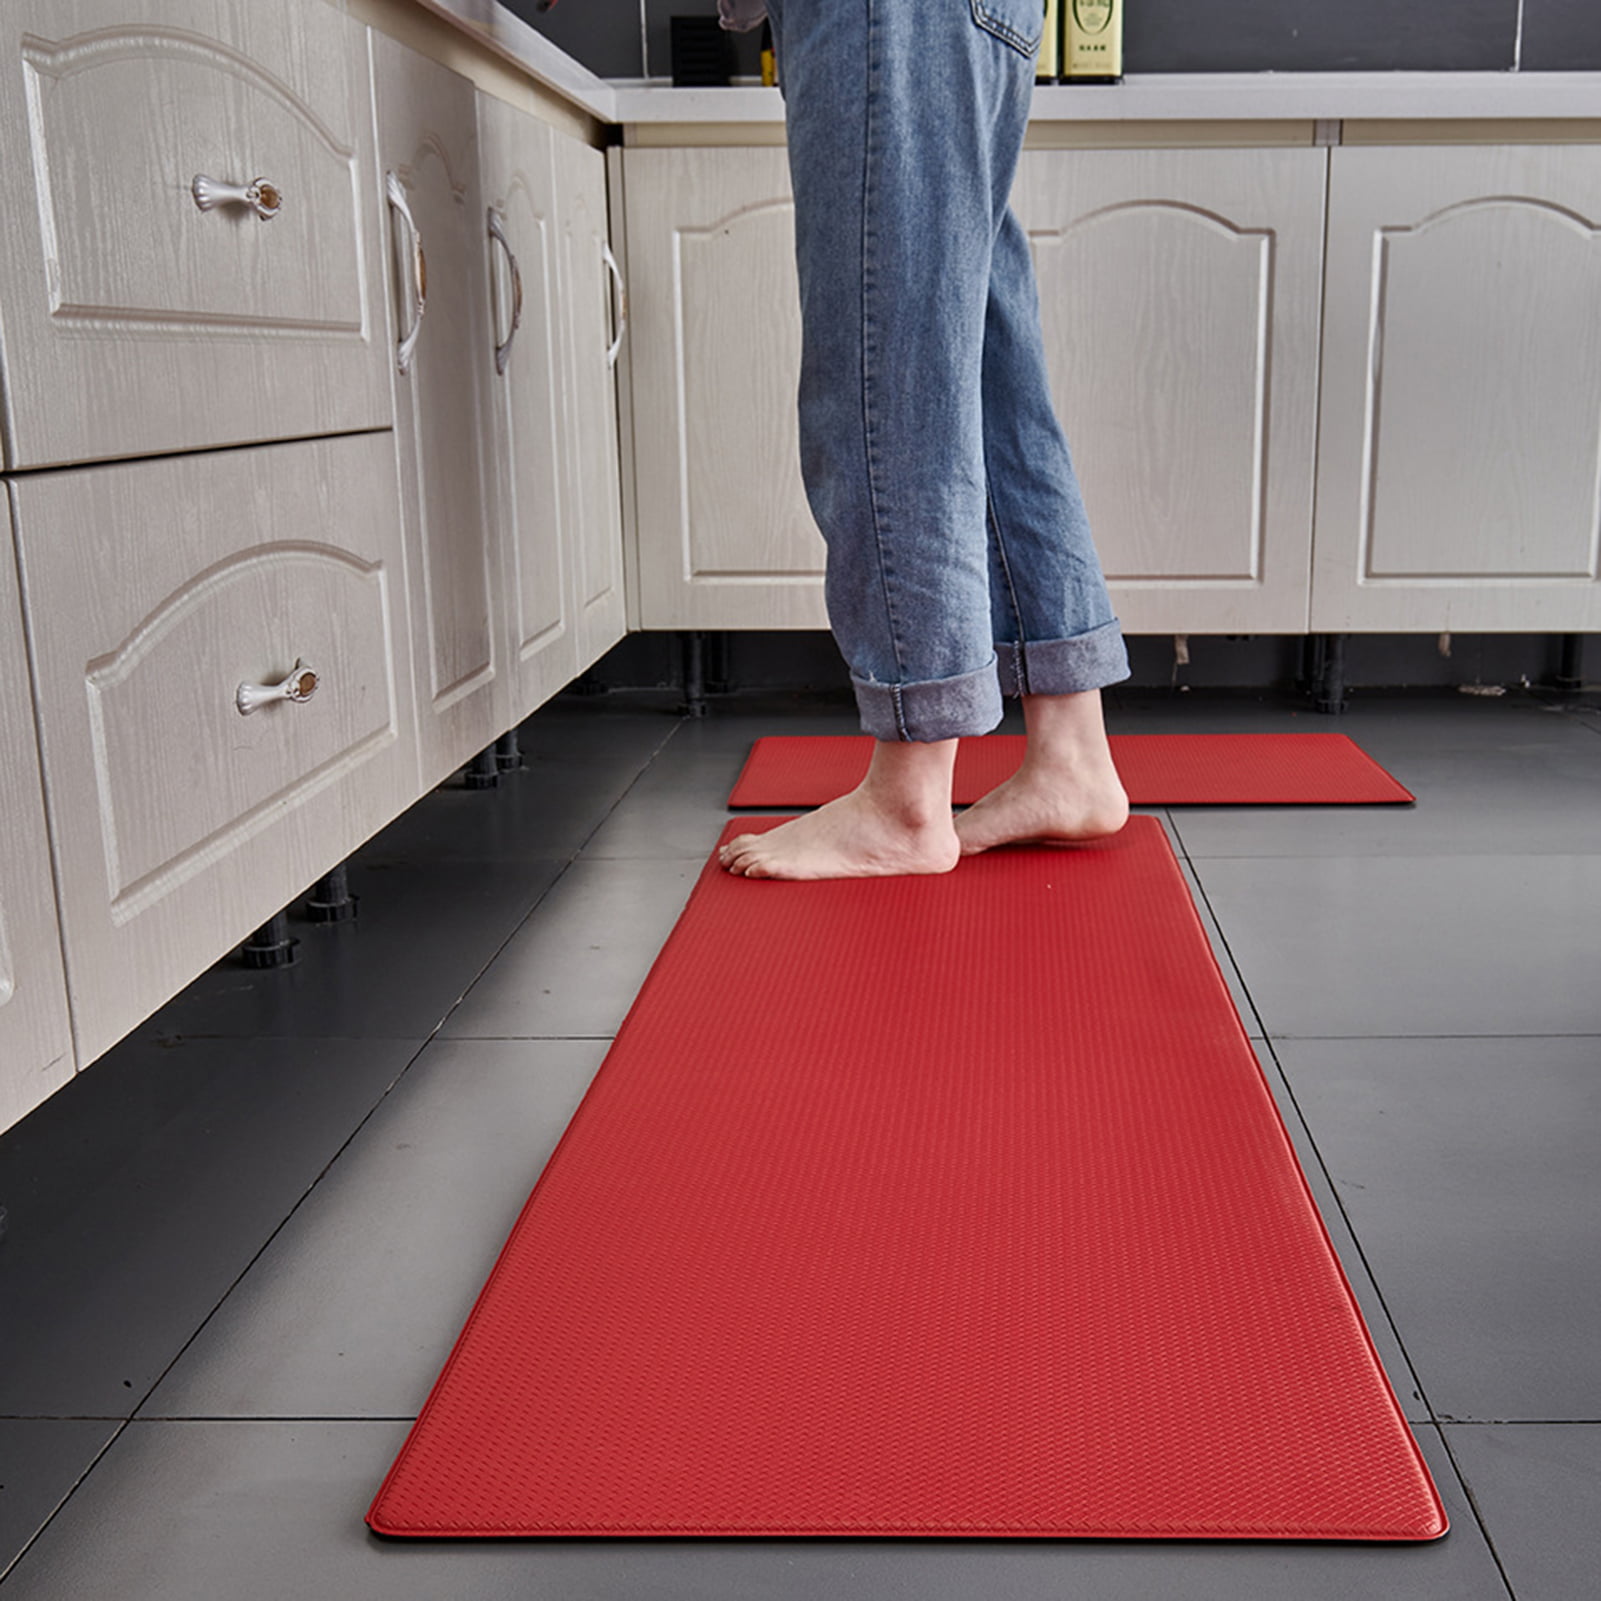 Oil Resistant Leather Carpet Underlay B&Q For Kitchen, Living Room, Balcony  Waterproof, Non Slip Door Mat With Clean Cleaning Function R230607 From  Liancheng08, $16.46